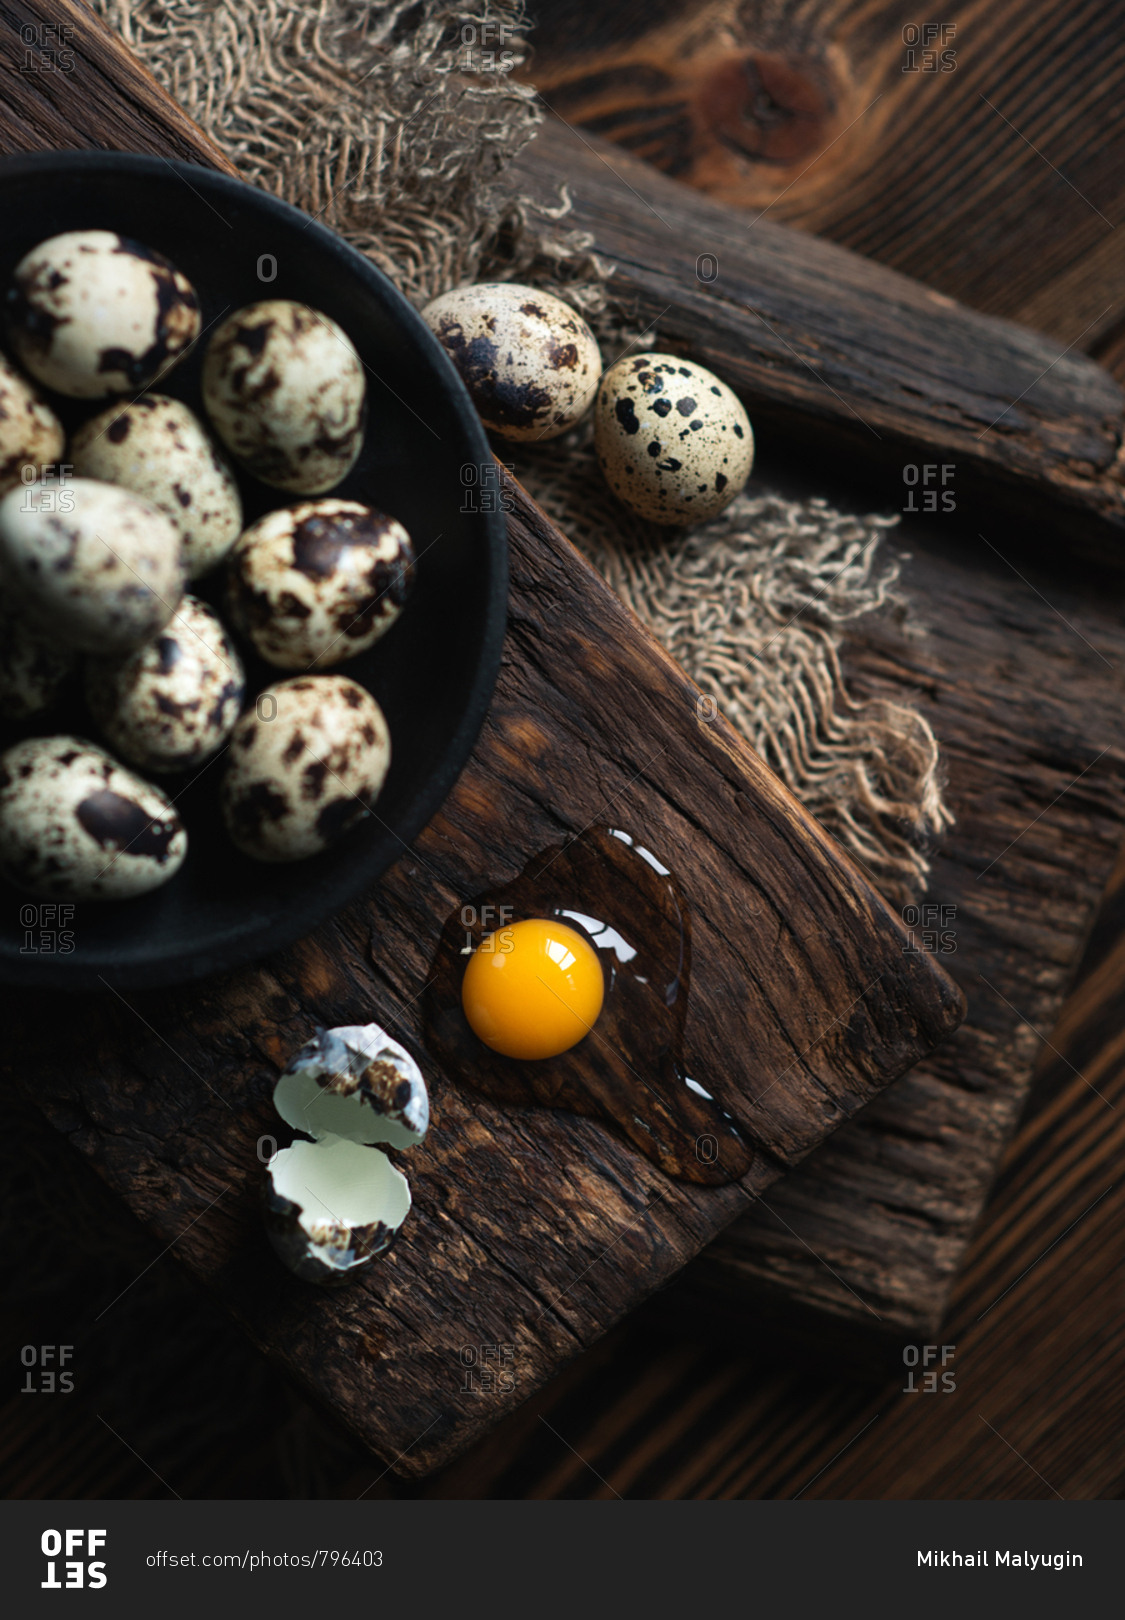 Quail eggs on dark ceramic plate over brown wooden background, view from above